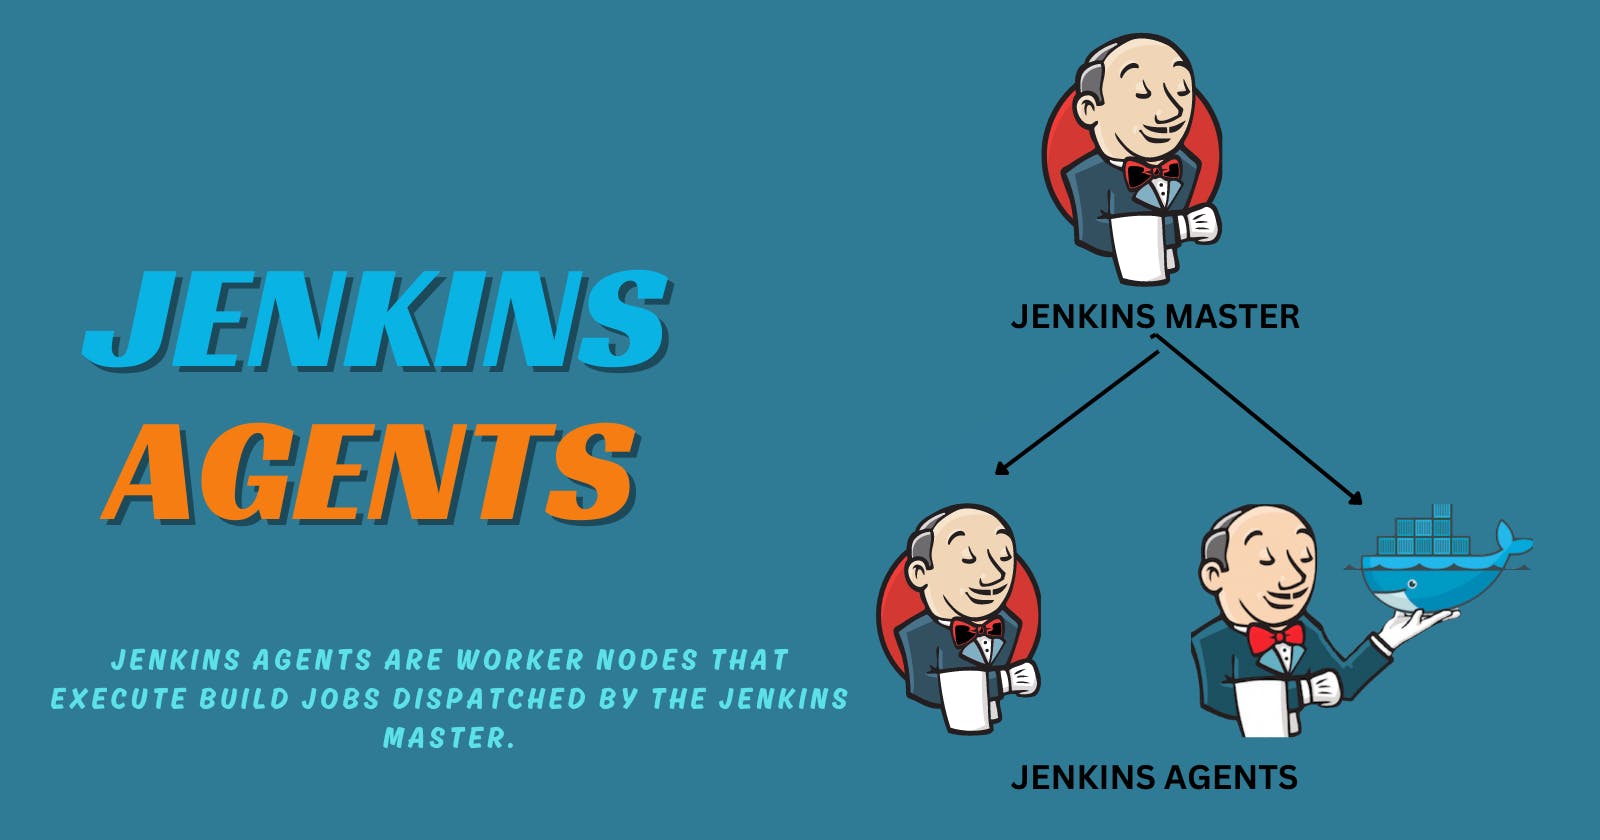 💎Day 28 - Jenkins Agents